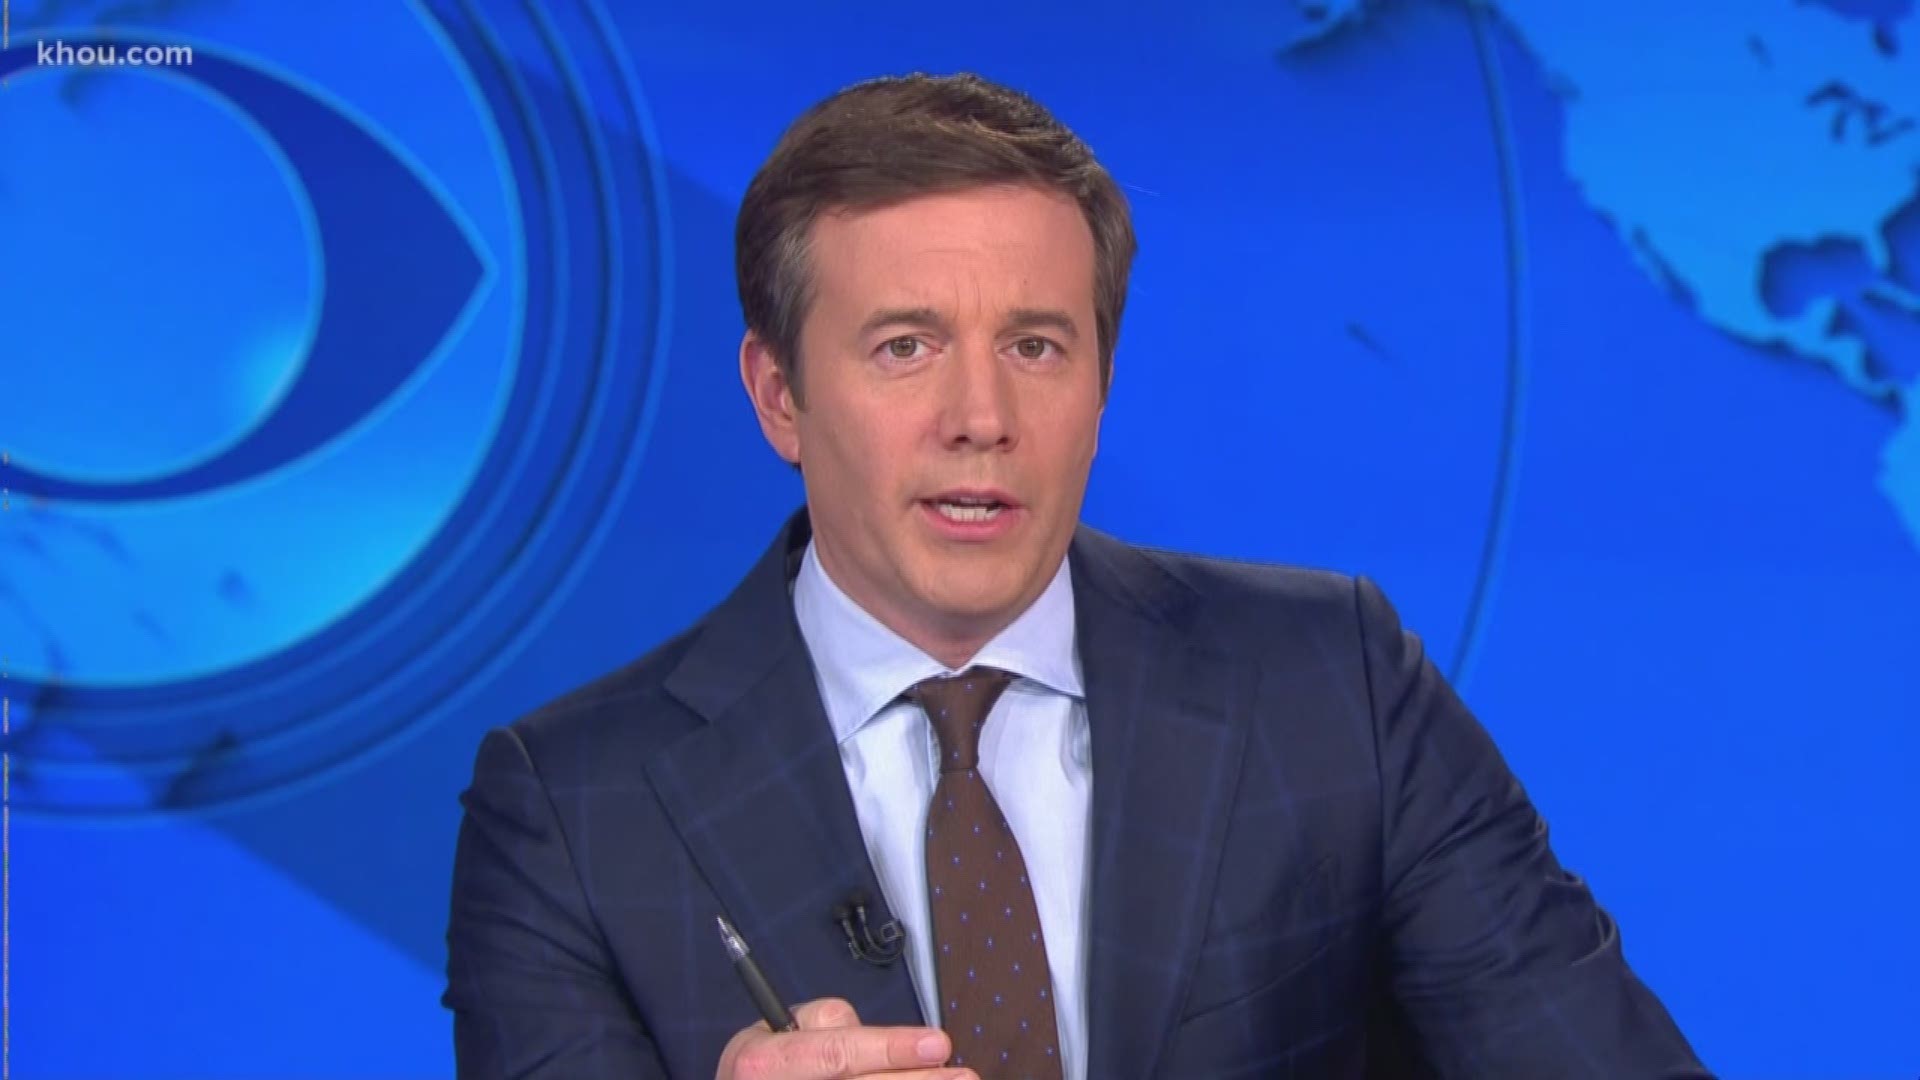 CBS News anchor Jeff Glor will be at President Trump's rally at the Toyota Center Monday night and spoke to KHOU 11 anchor Len Cannon about midterm elections and